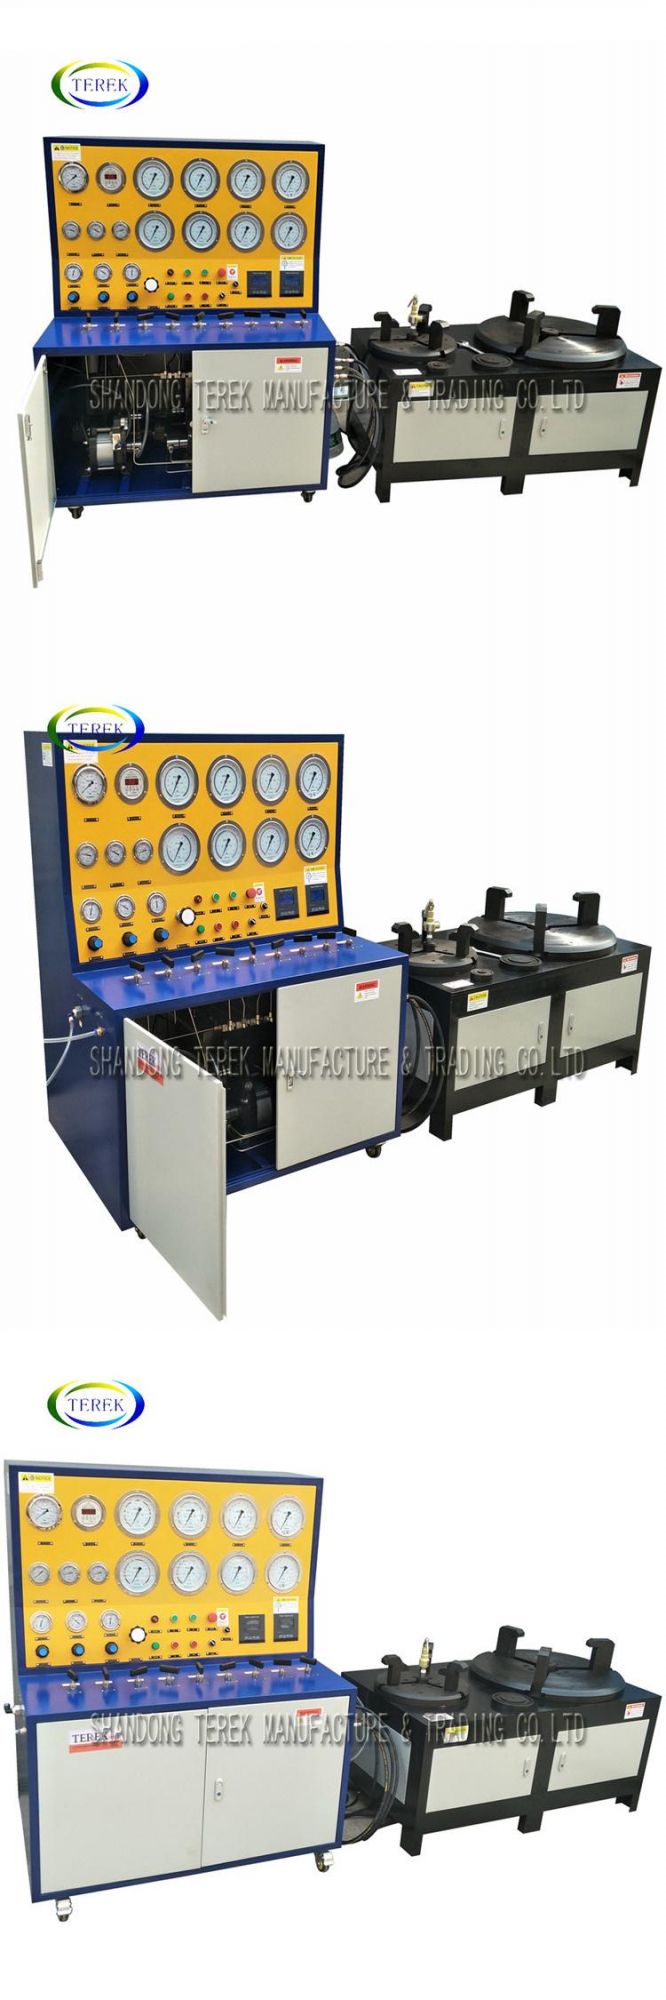 Tvt-40-Dn400 Manual Control Pneumatic Safety Relief Valve Test Equipment for Pressure Test